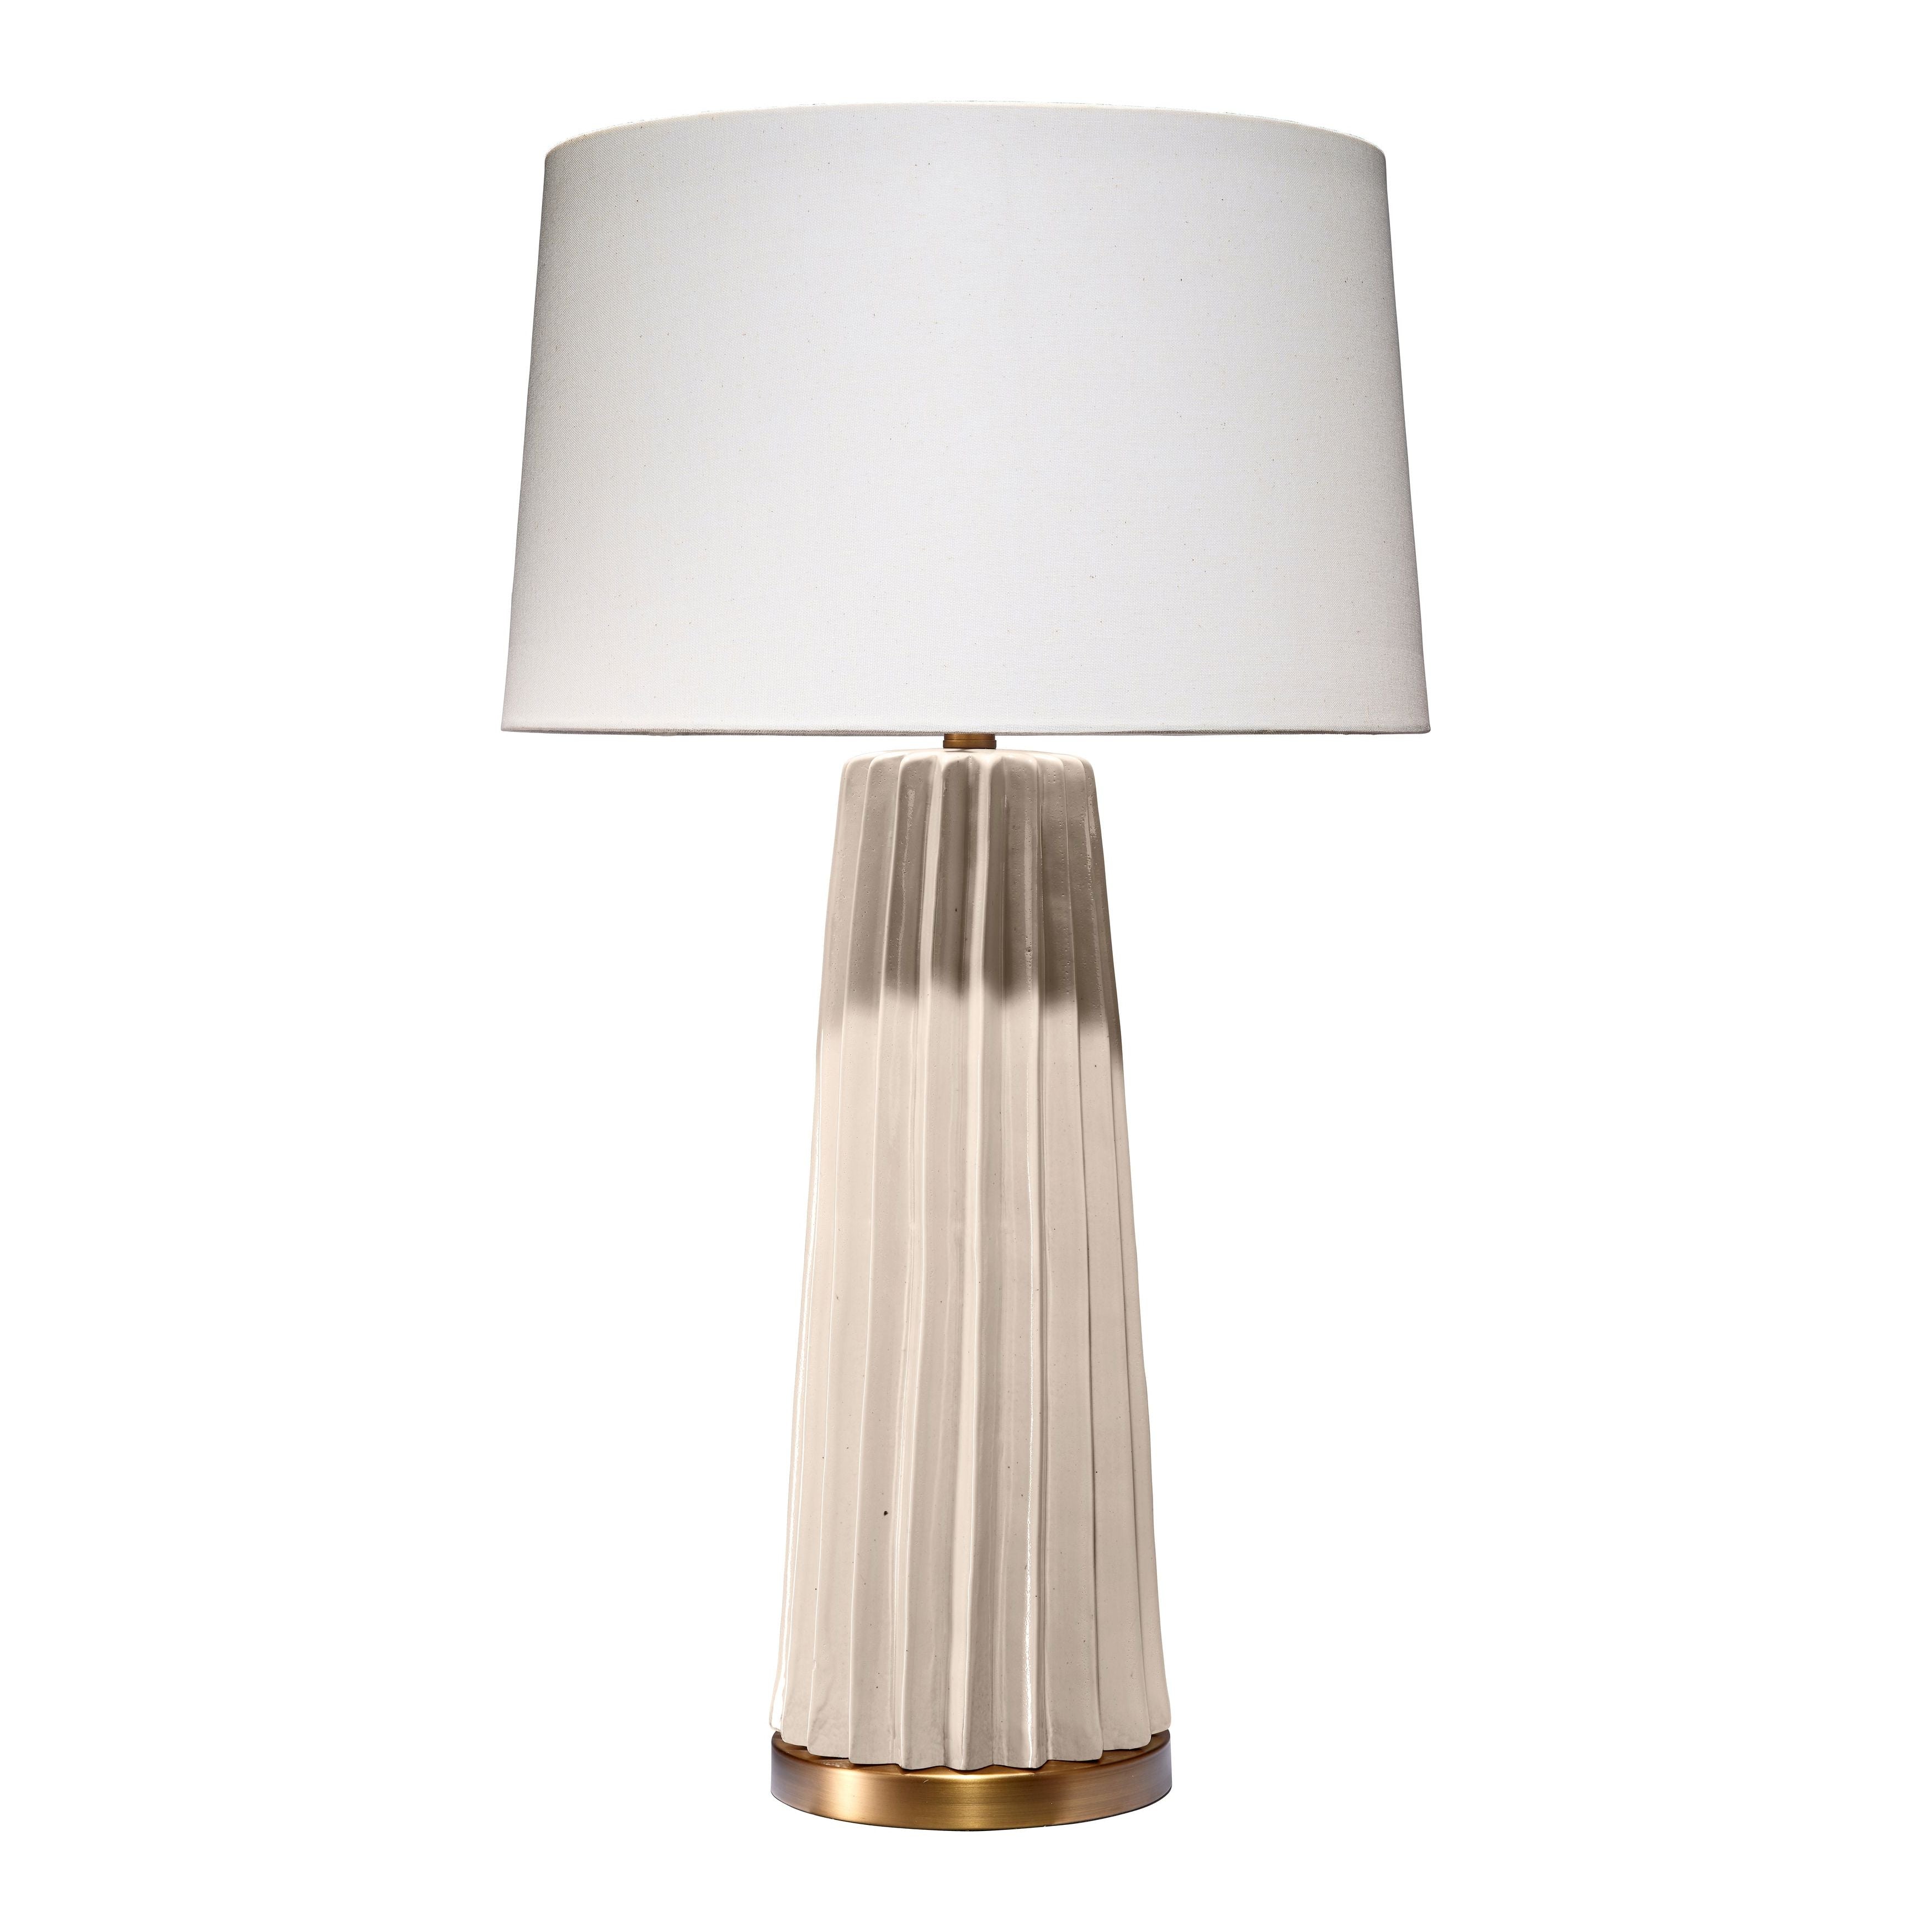 Jamie Young Company - 9PLEATEDTLCR -  Pleated Table Lamp - Pleated - Cream